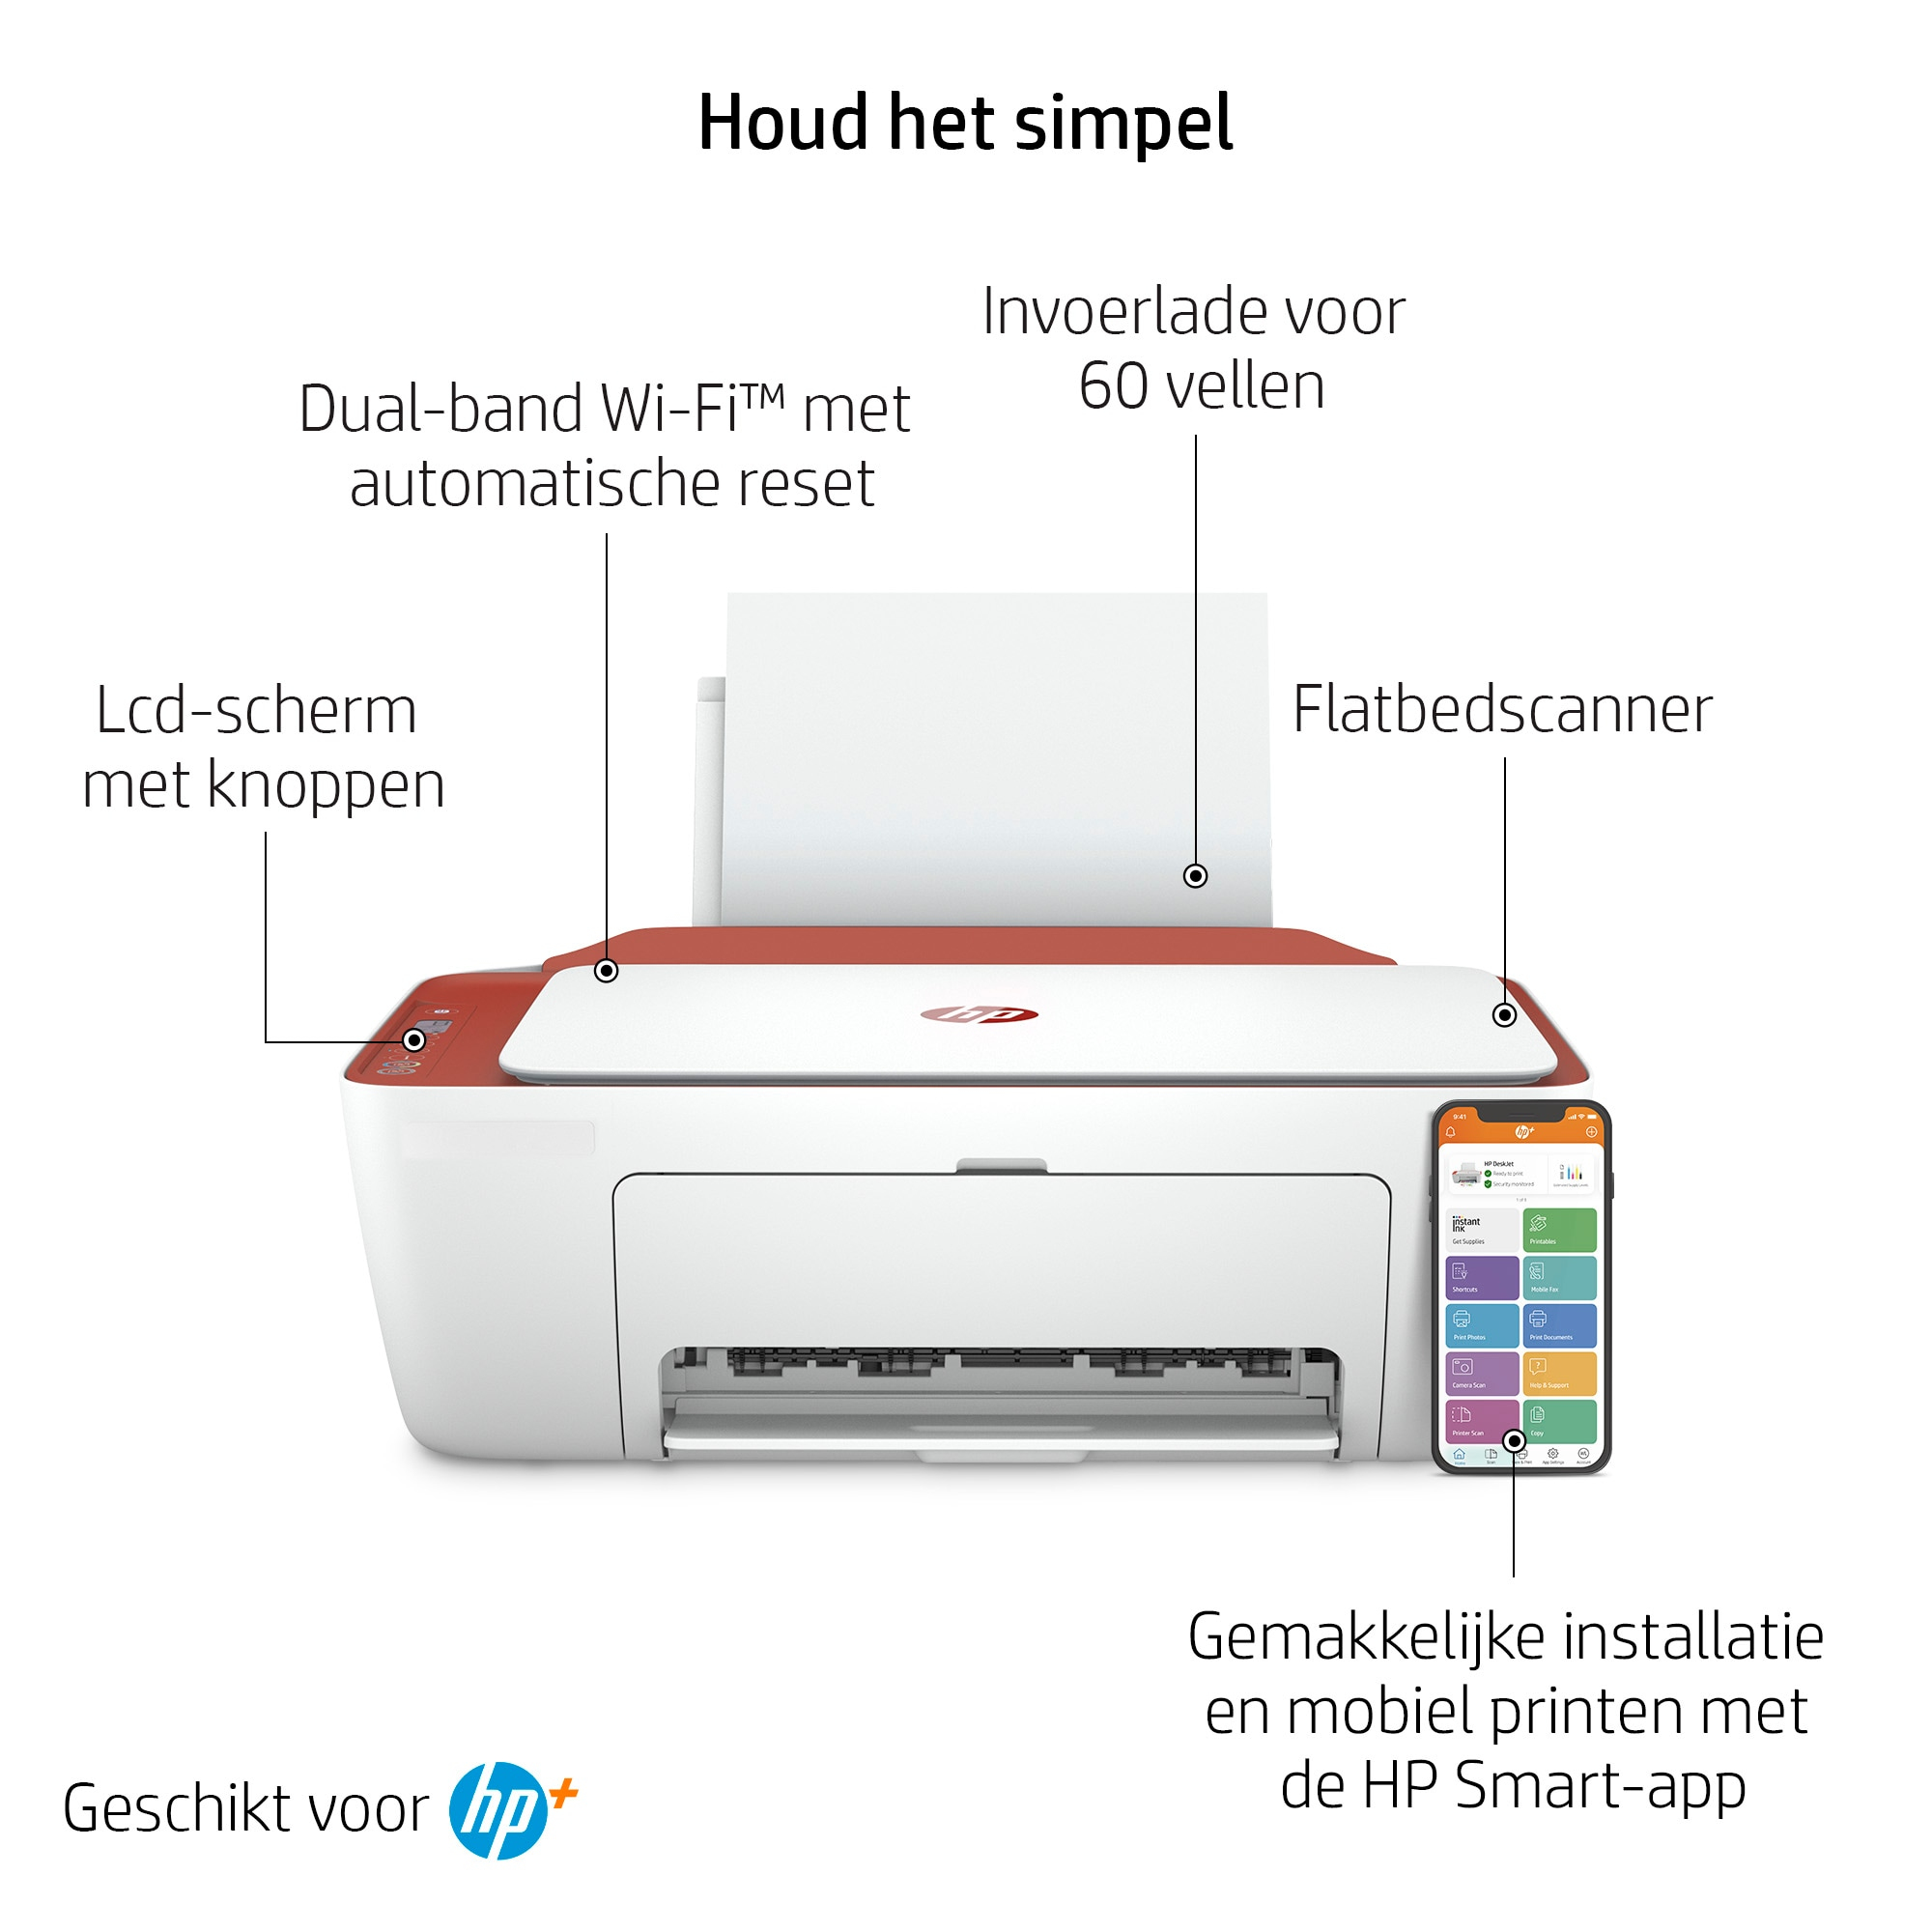 HP DeskJet 2723e All-in-One A4 color 5.5ppm Print Scan Copy